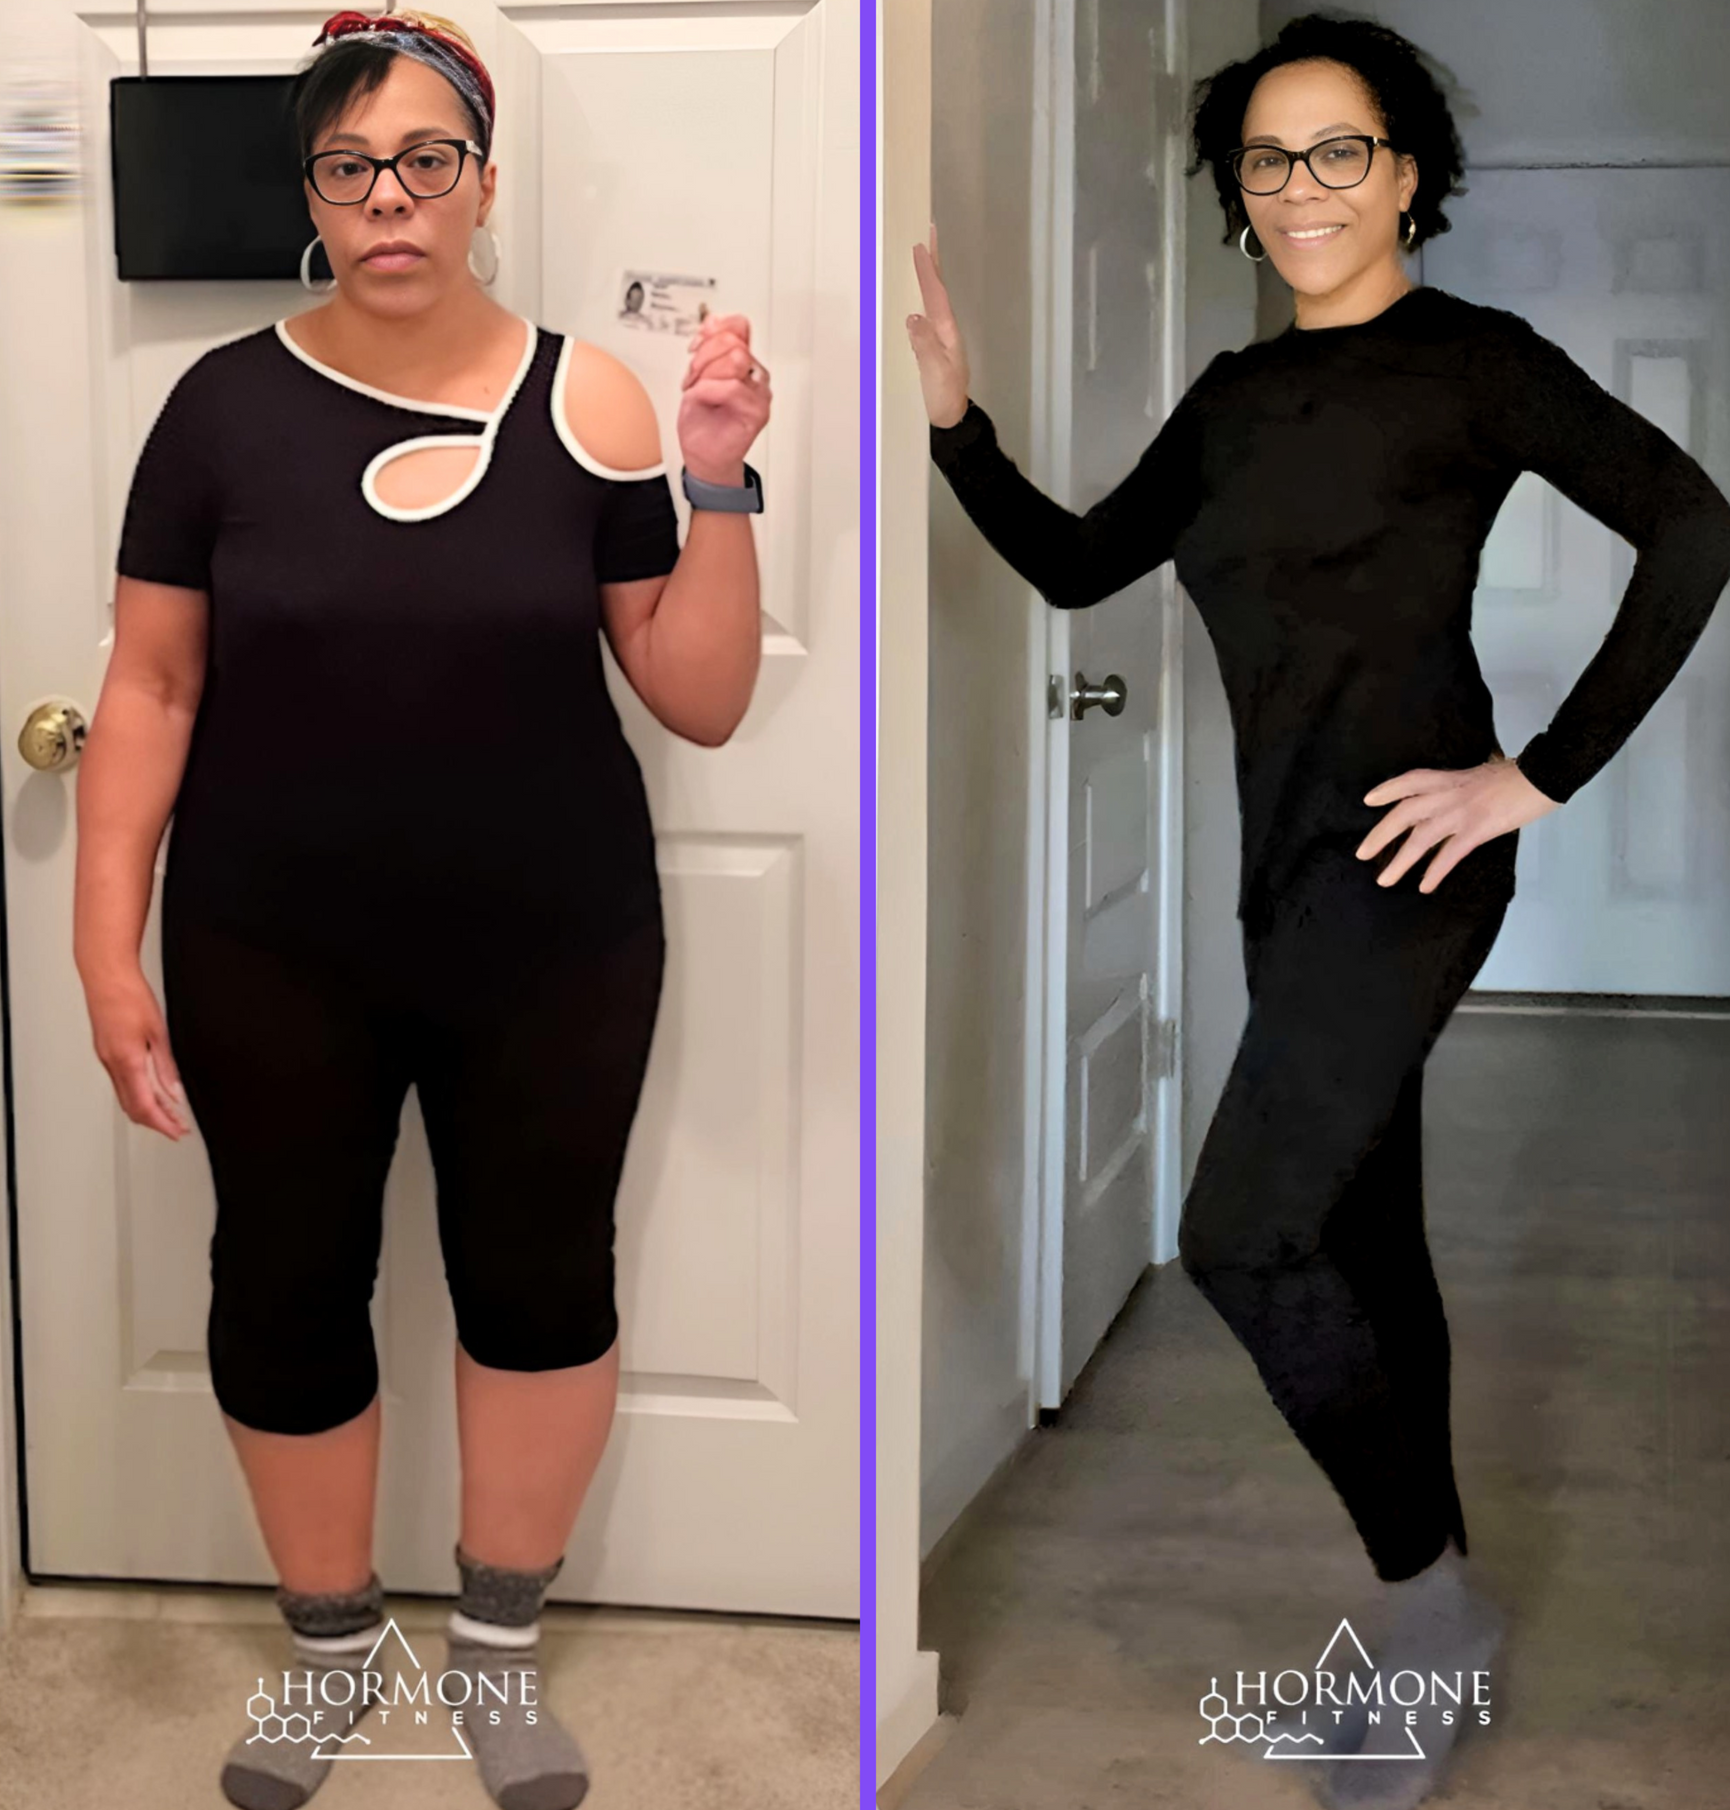 A before and after weight loss transformation of a middle aged black woman wearing black clothes